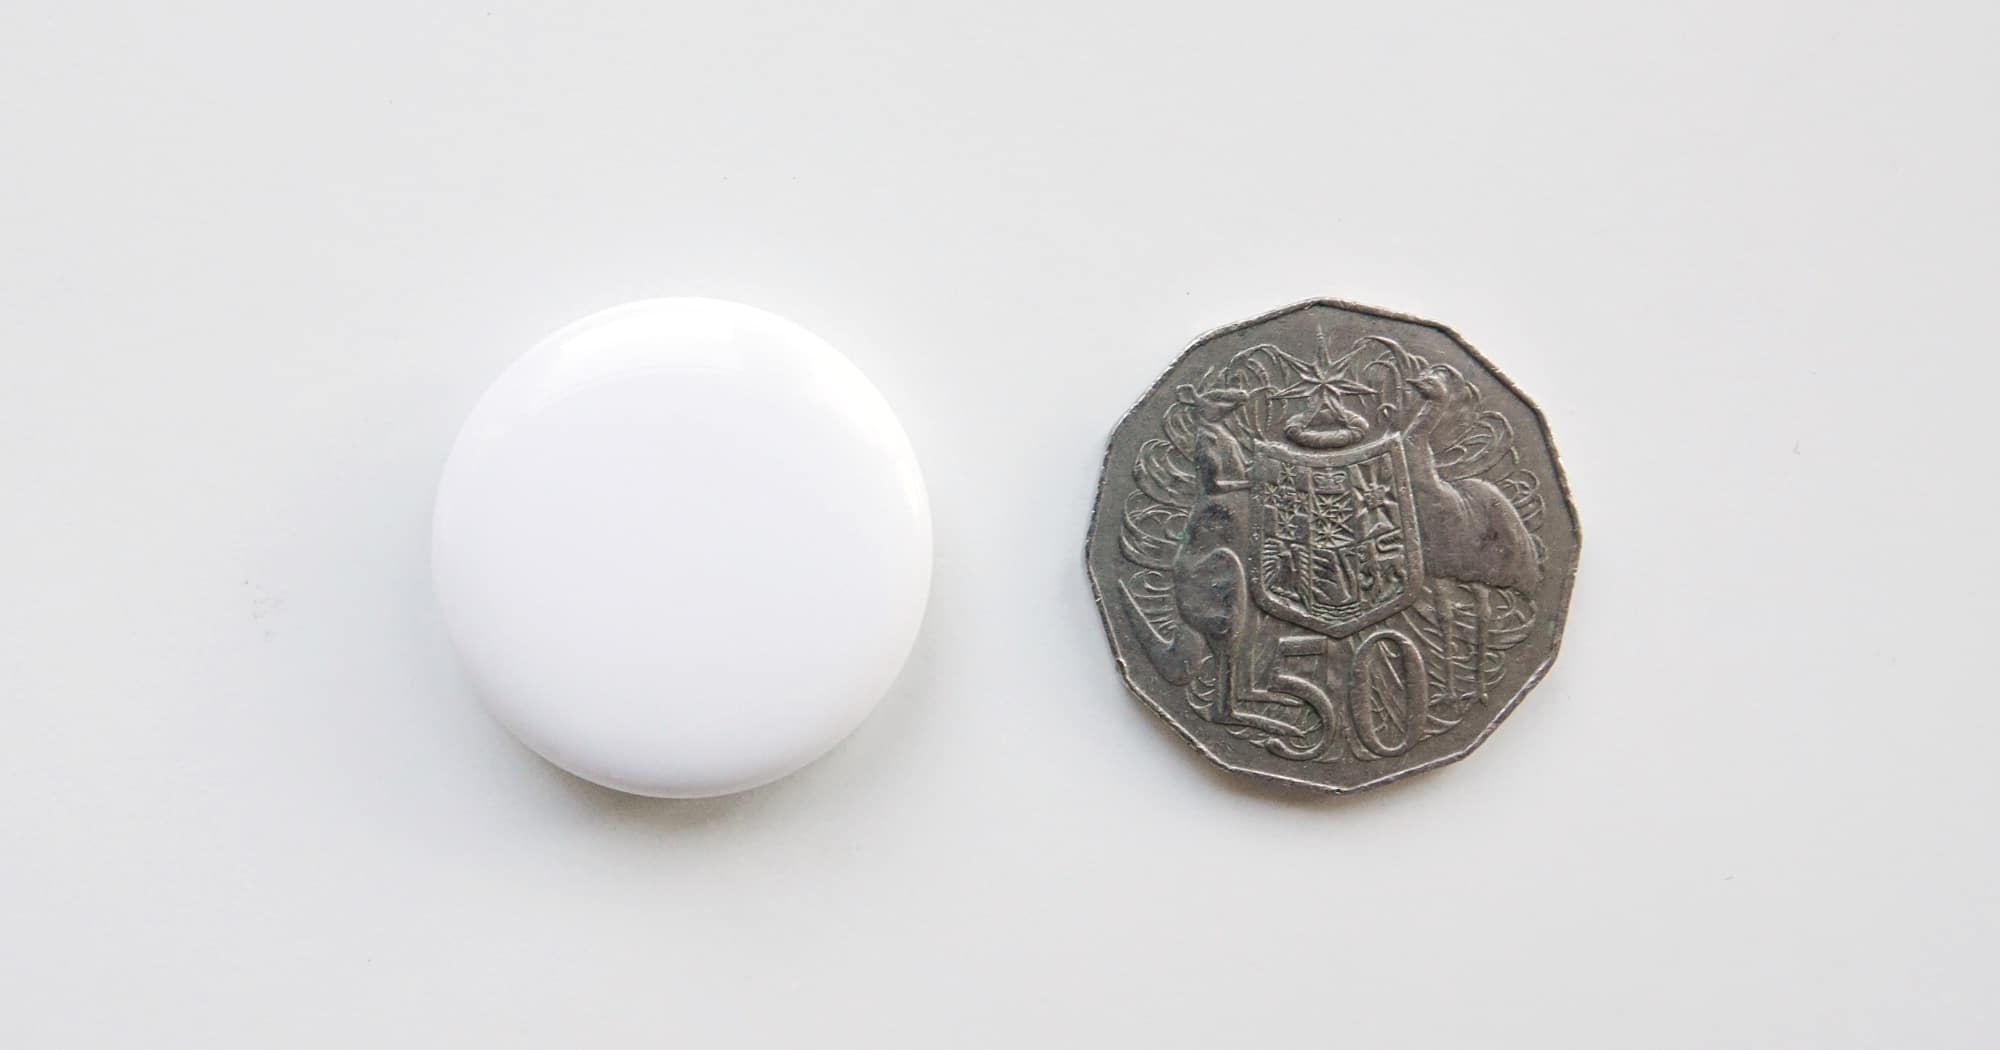 An AirTag is the size of an Australian 50 cent coin